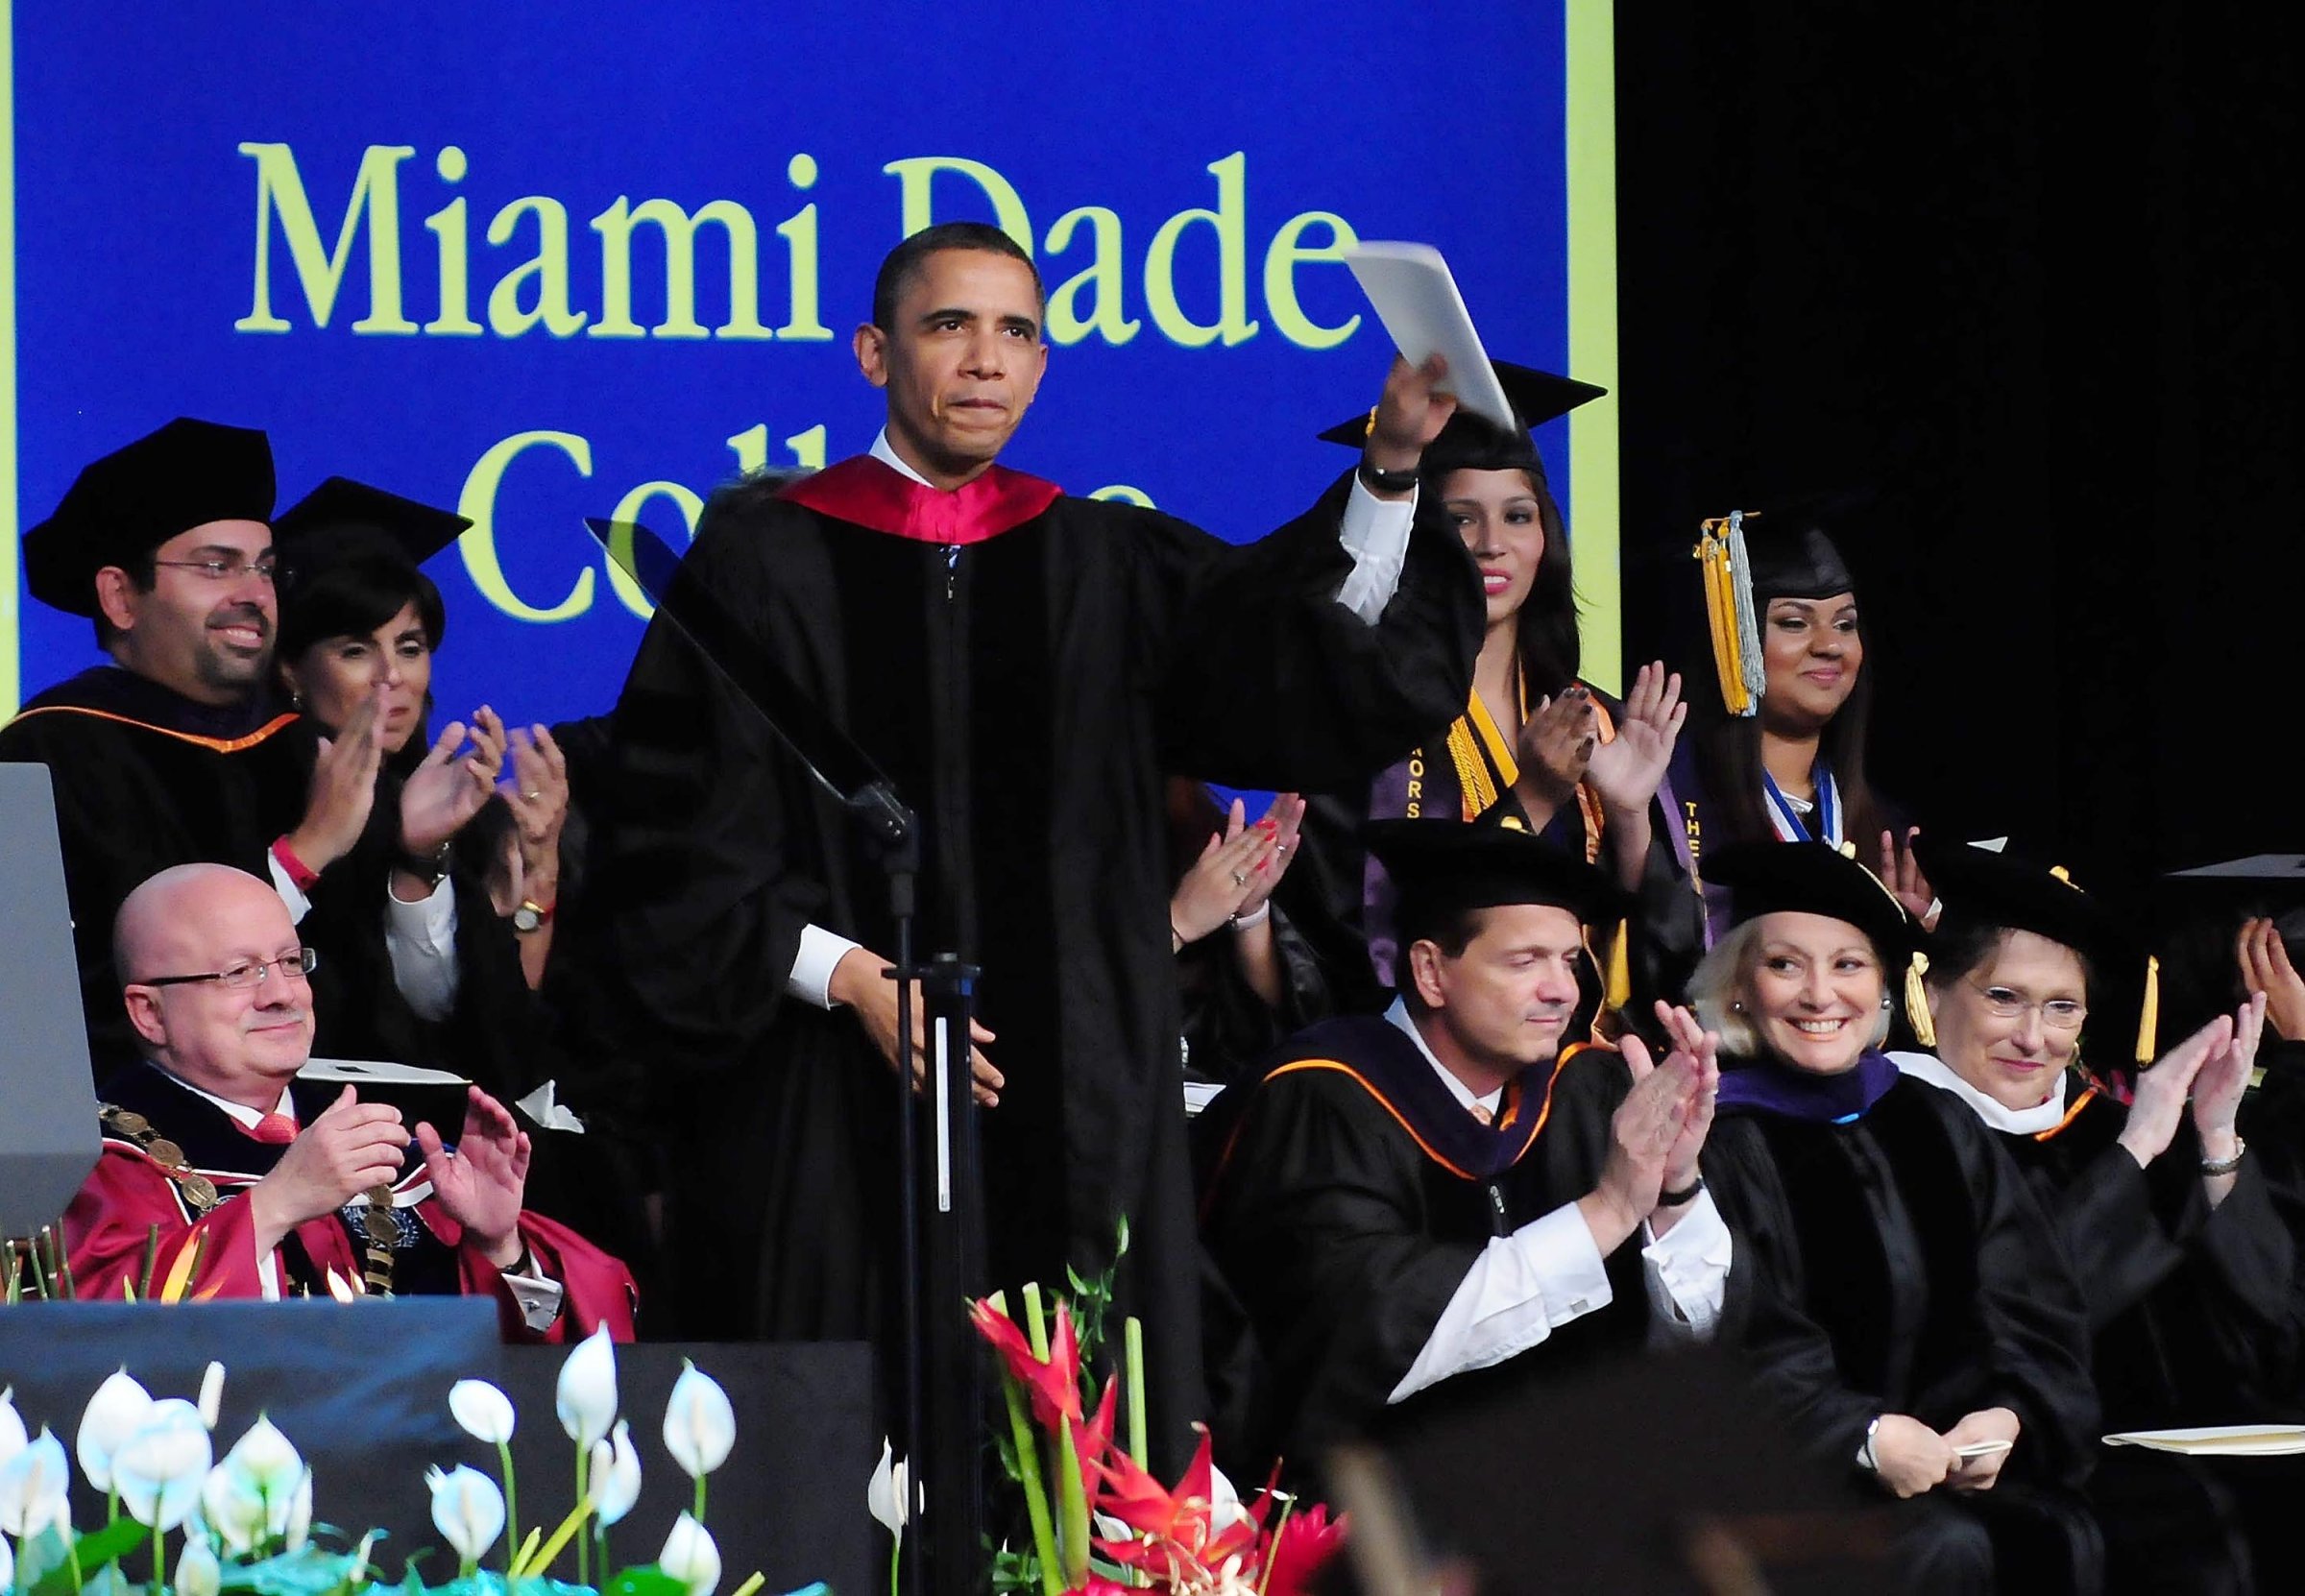 Barack Obama at Miami Dade Commencement Address Transcript TIME